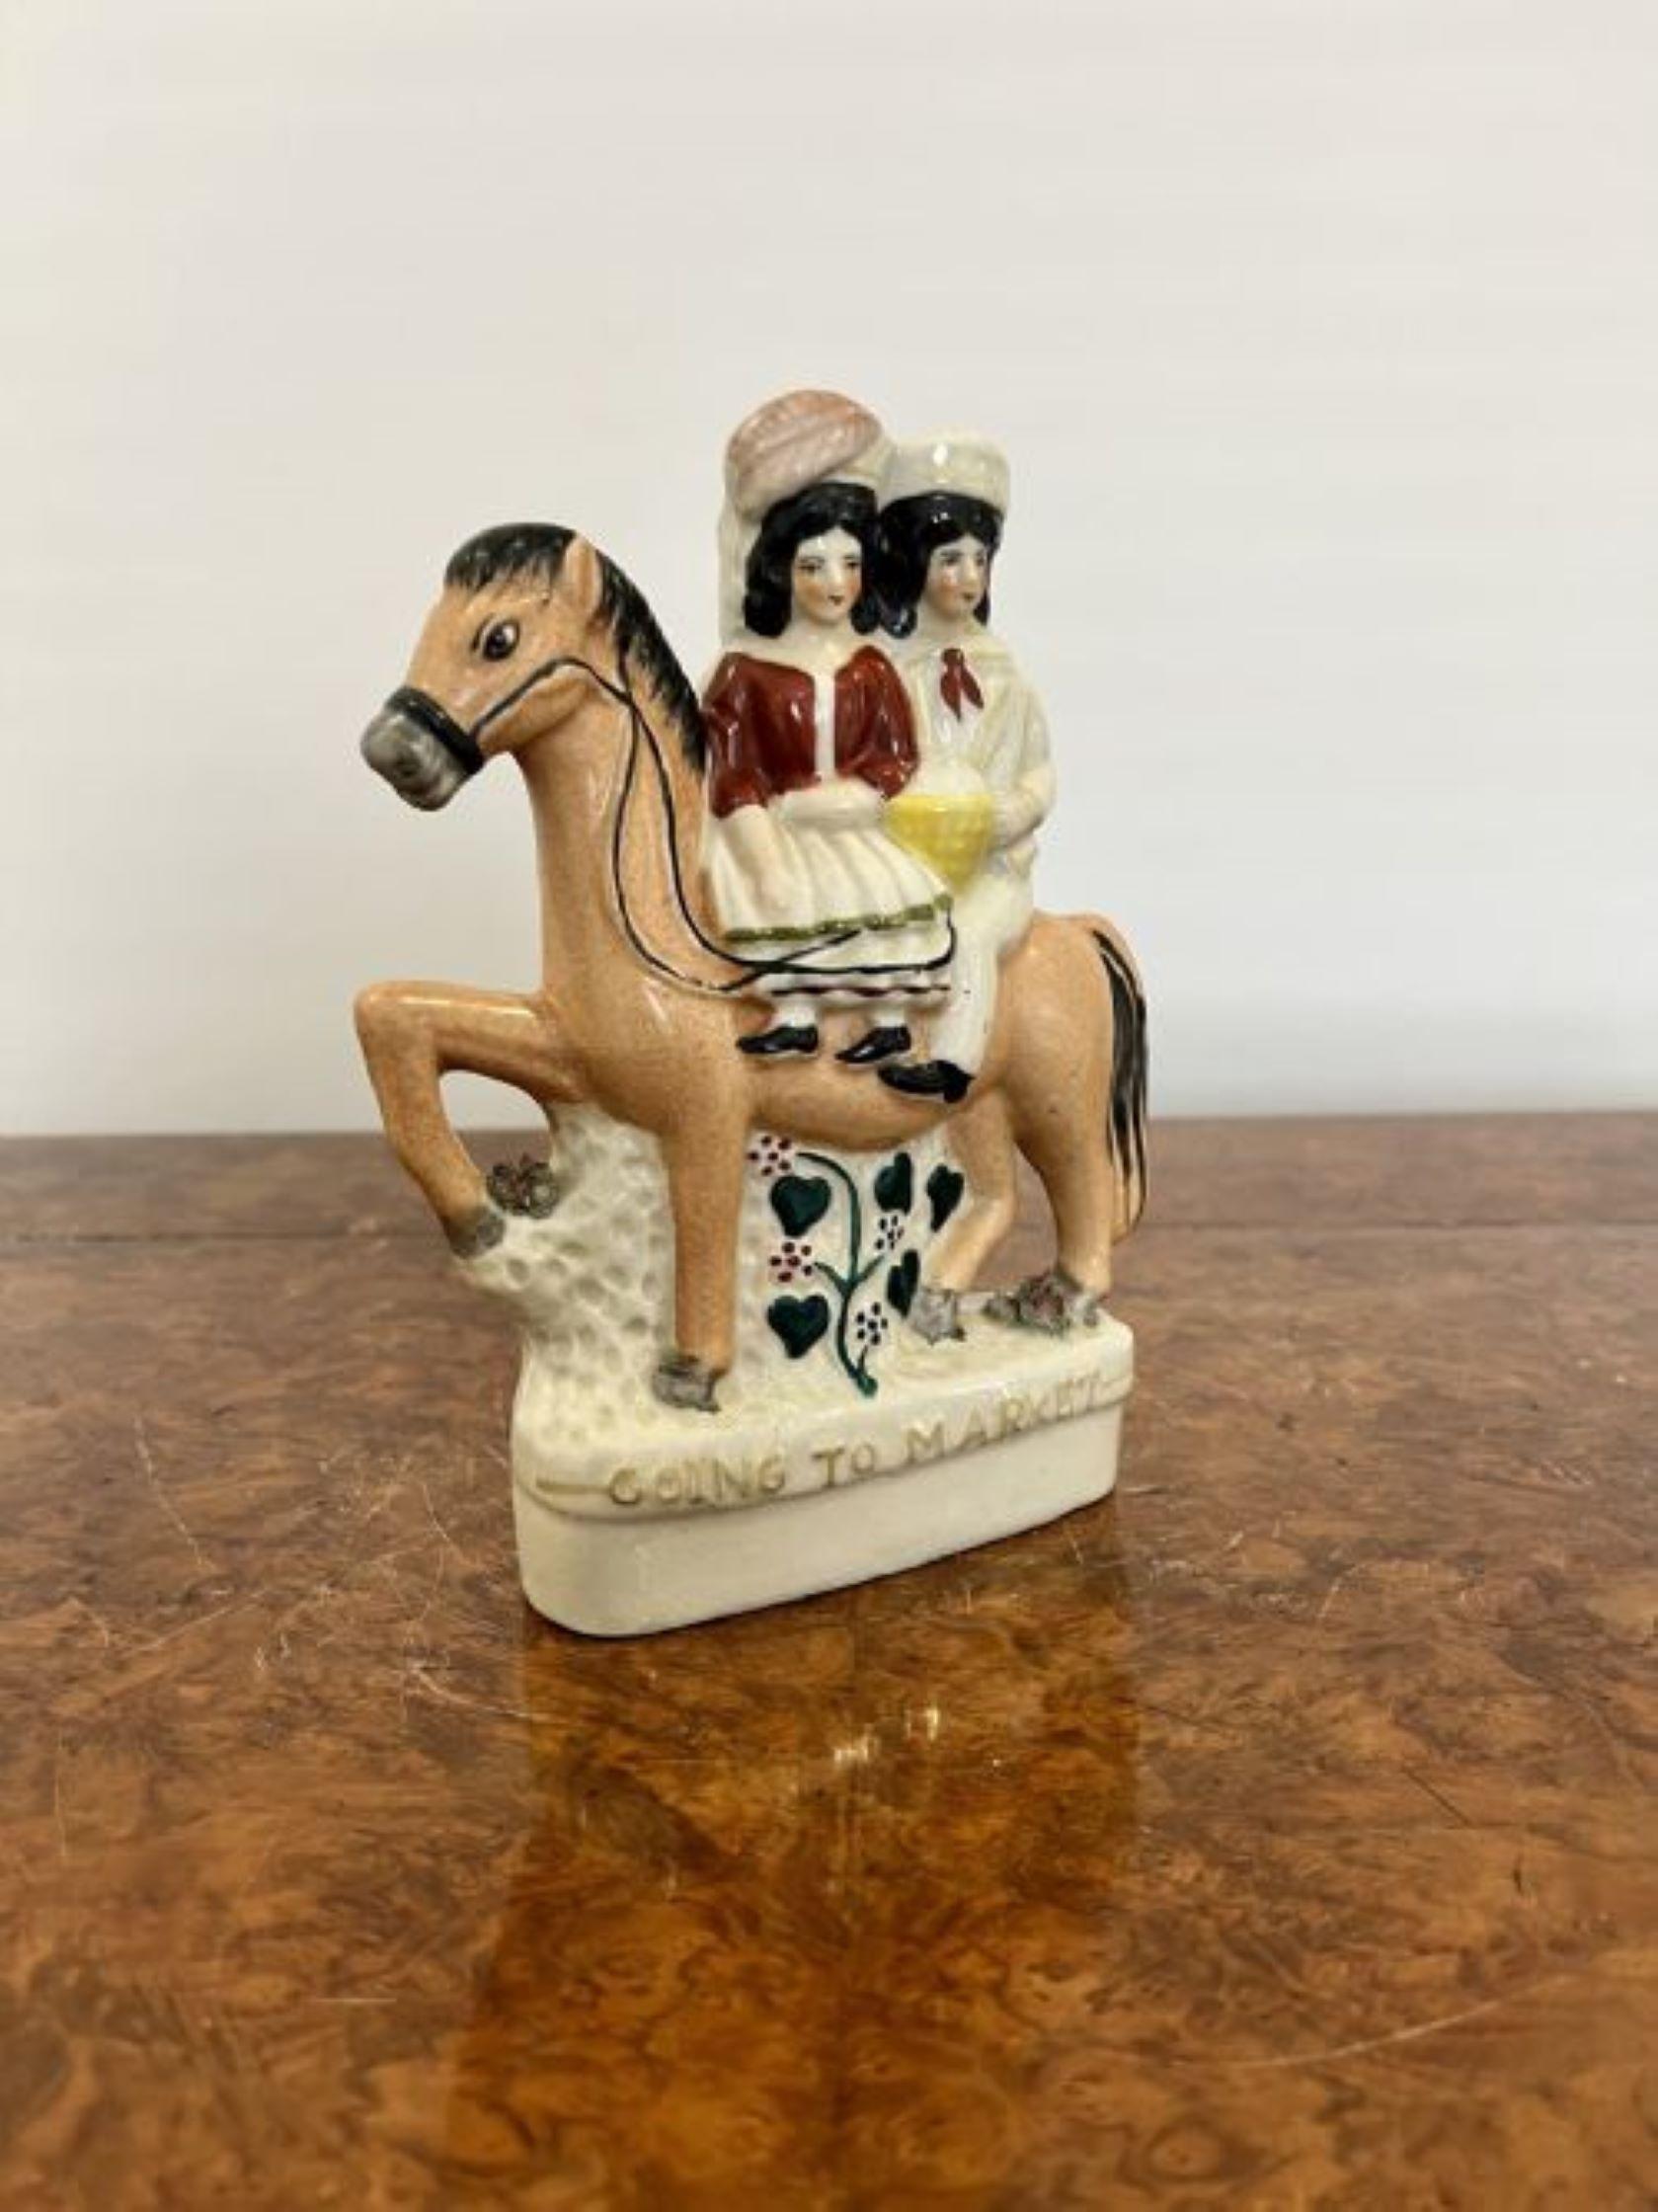 Antique Victorian Staffordshire 'going to market' figure of two people riding on a horse in wonderful period clothing in lovely green, yellow, brown and cream colours 